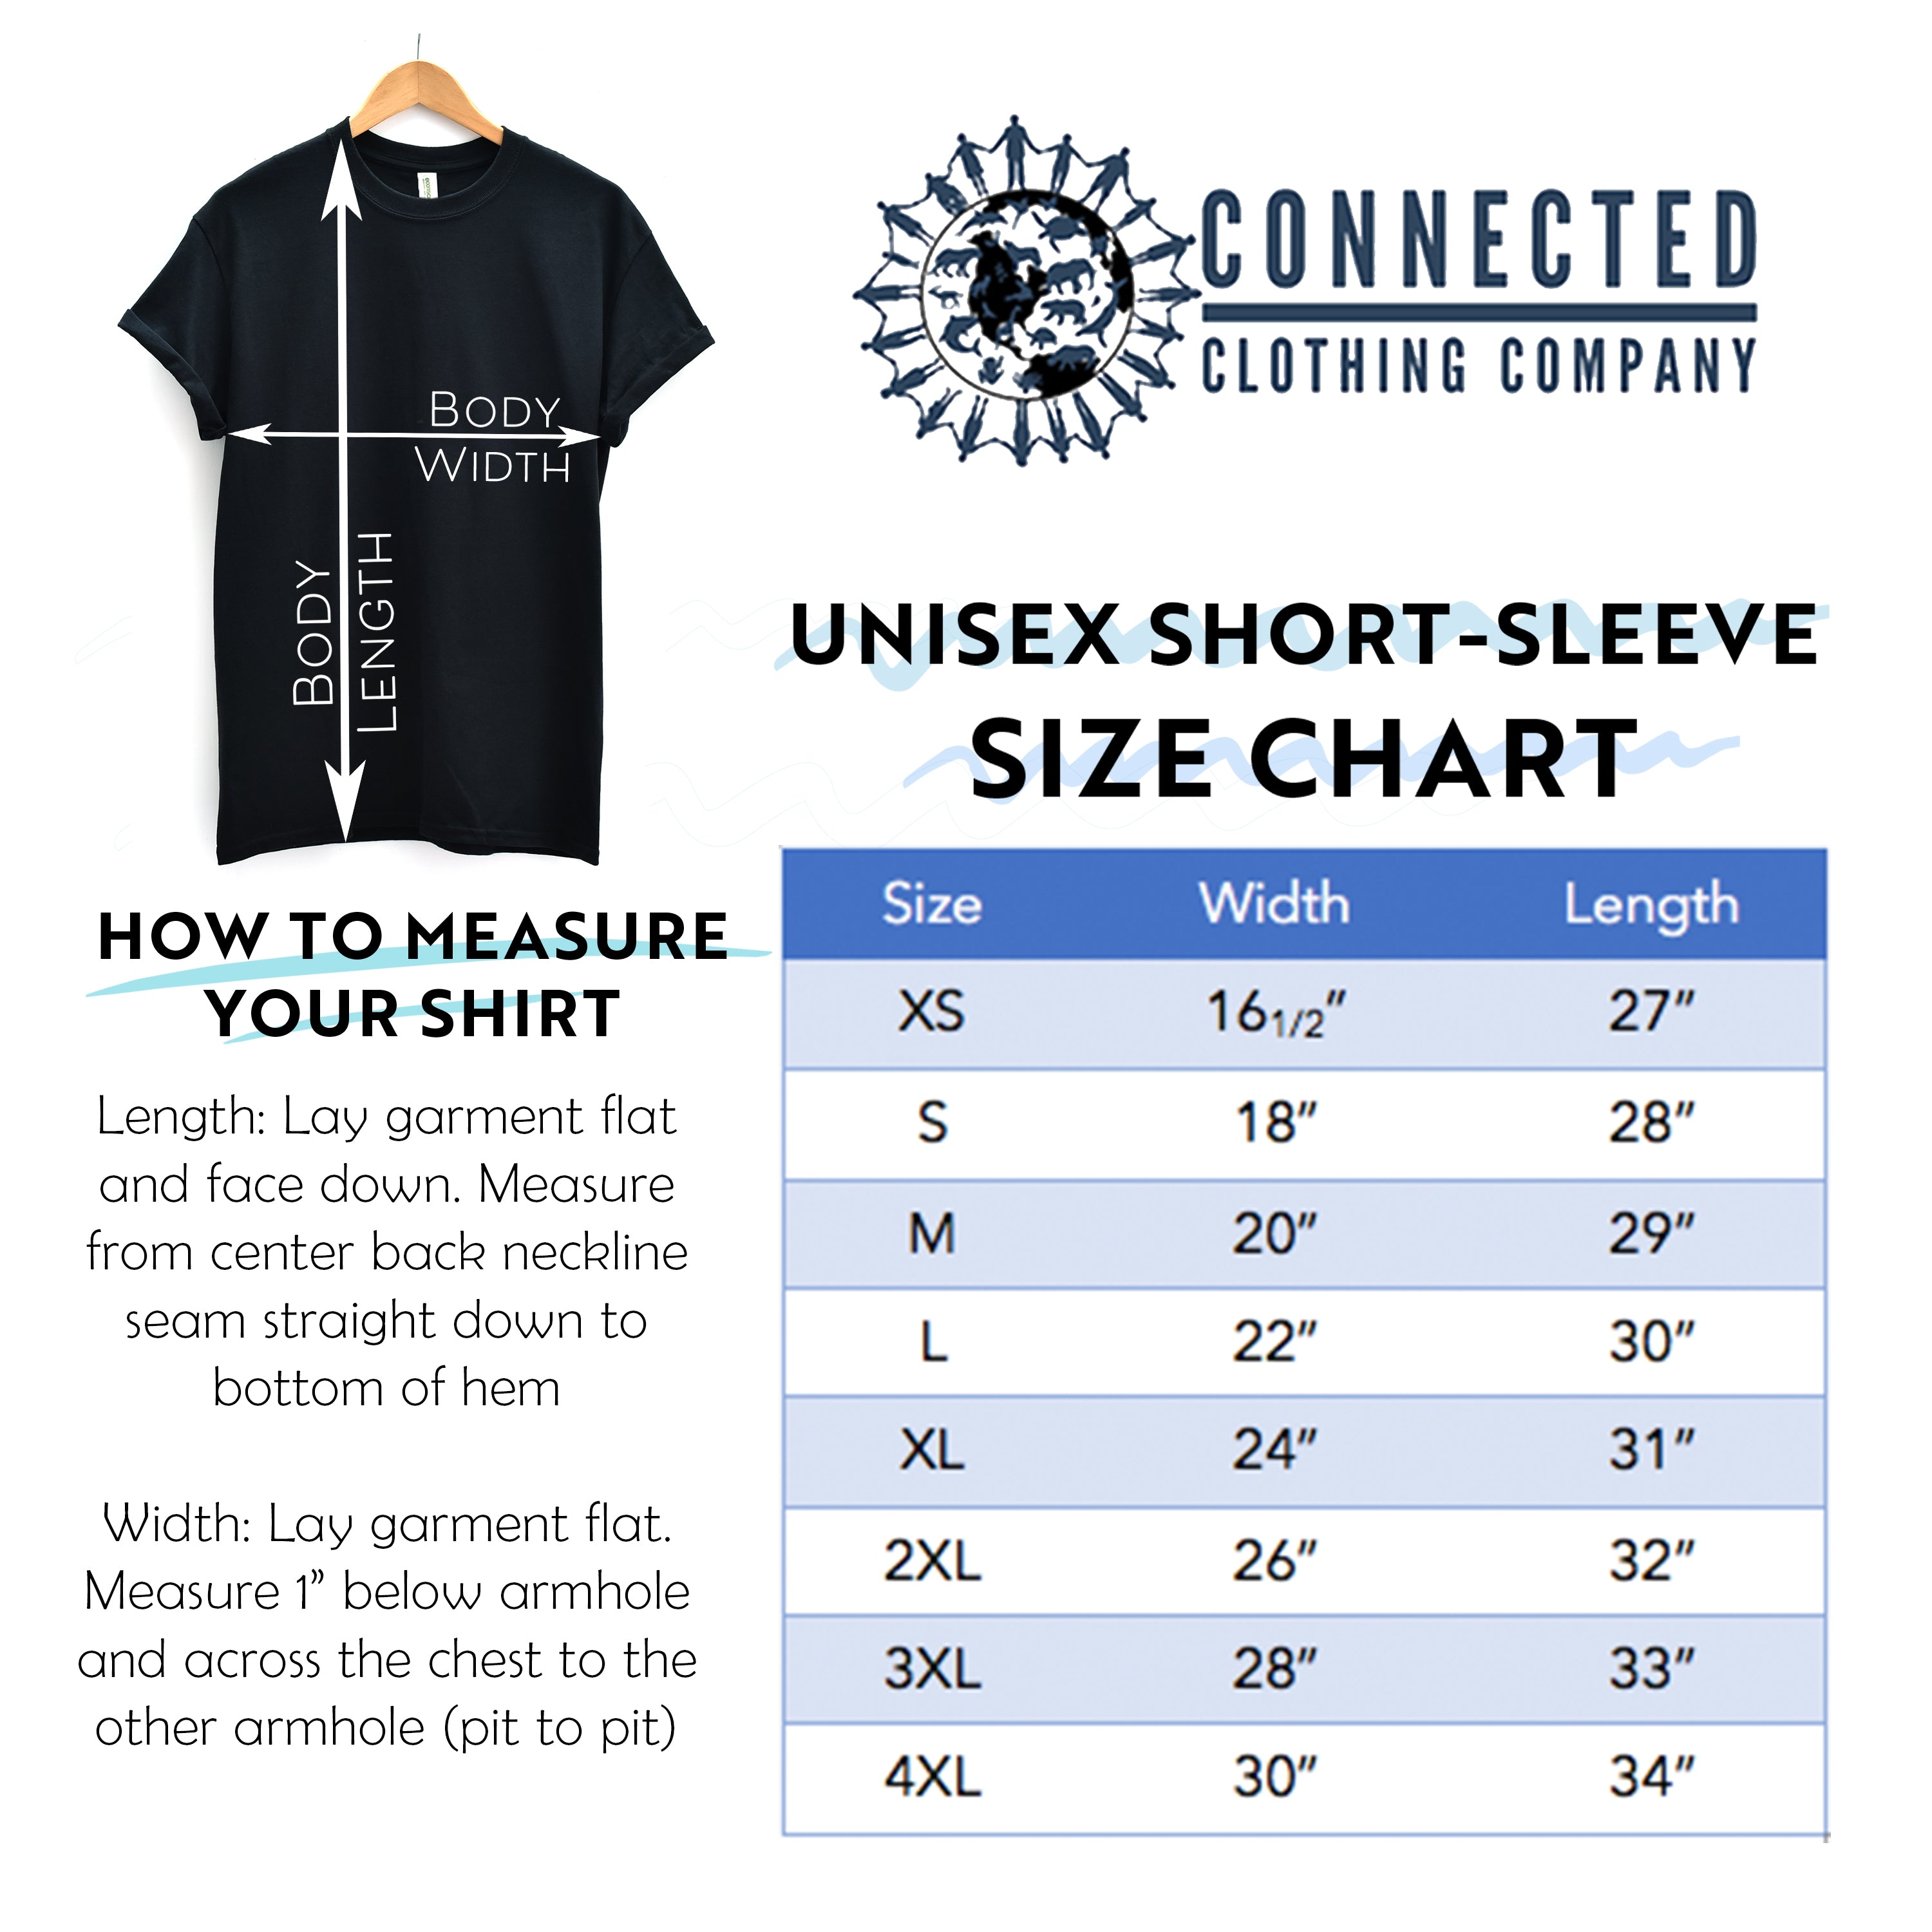 Unisex Short-Sleeve Tee Size Chart - sharonkornman - Ethically and Sustainably Made - 10% donated to Mission Blue ocean conservation